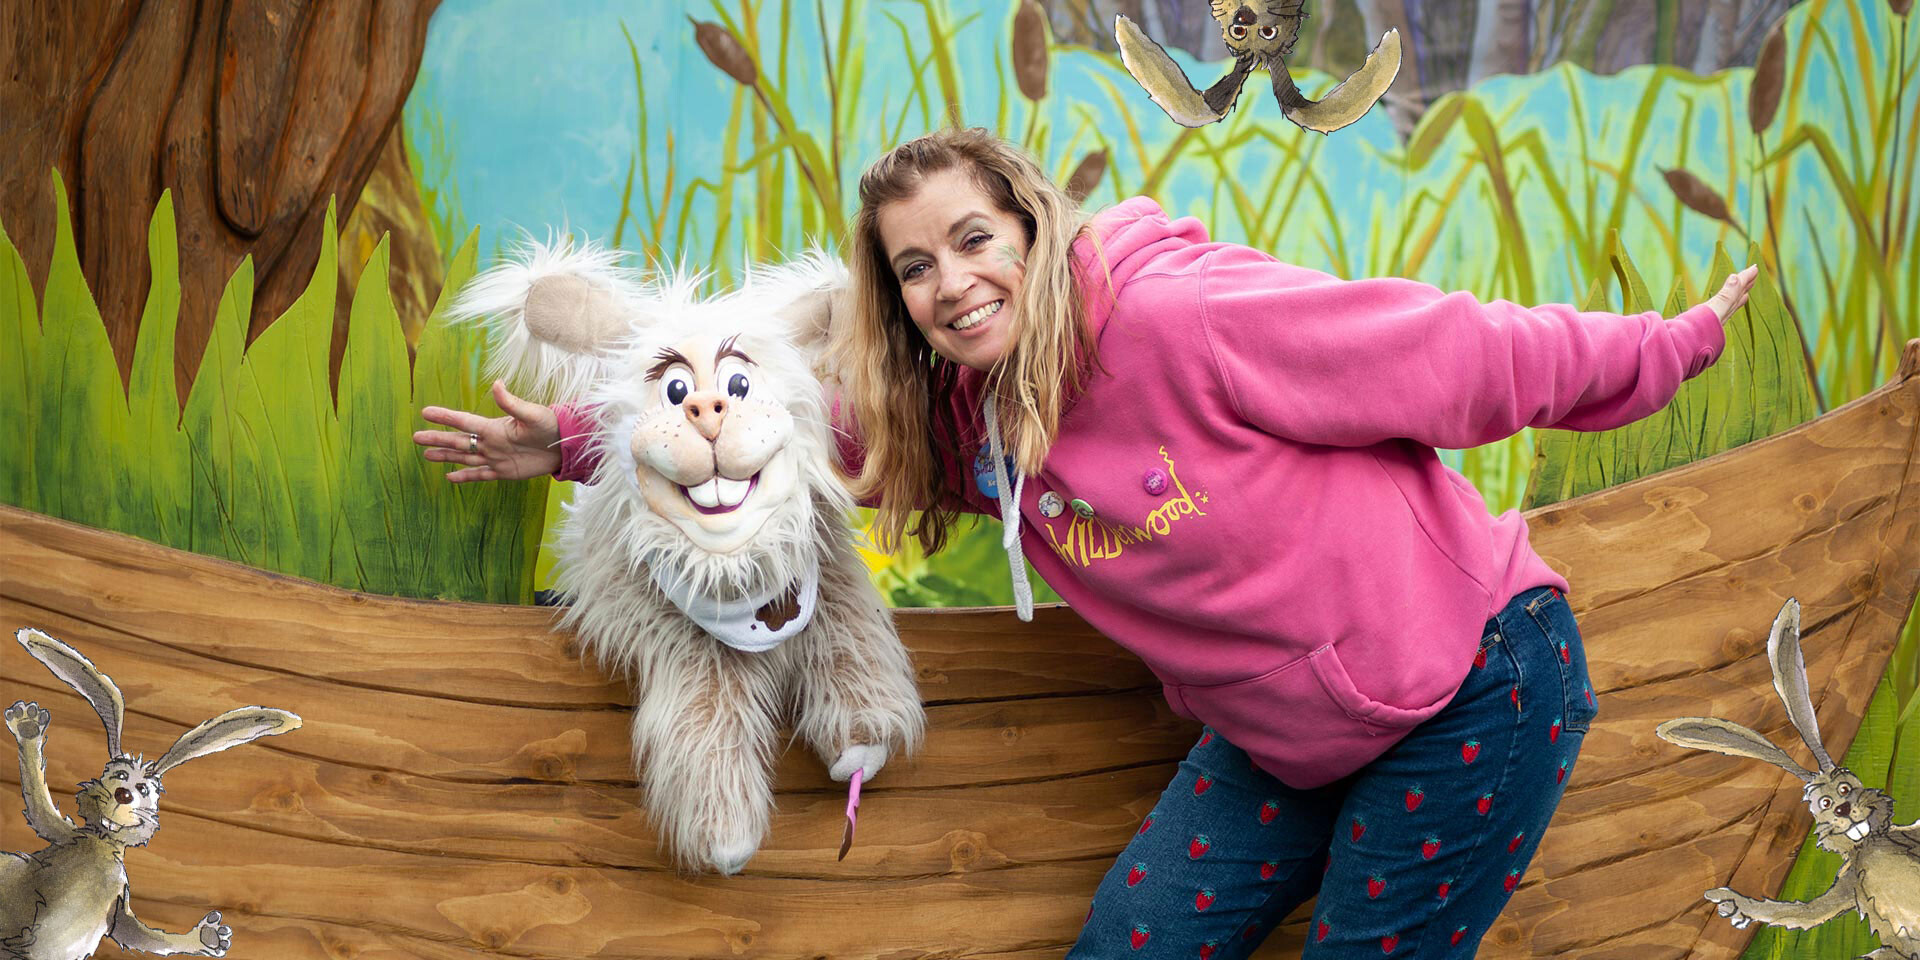 Meet the Easter Bunny at BeWILDerwood this Easter!